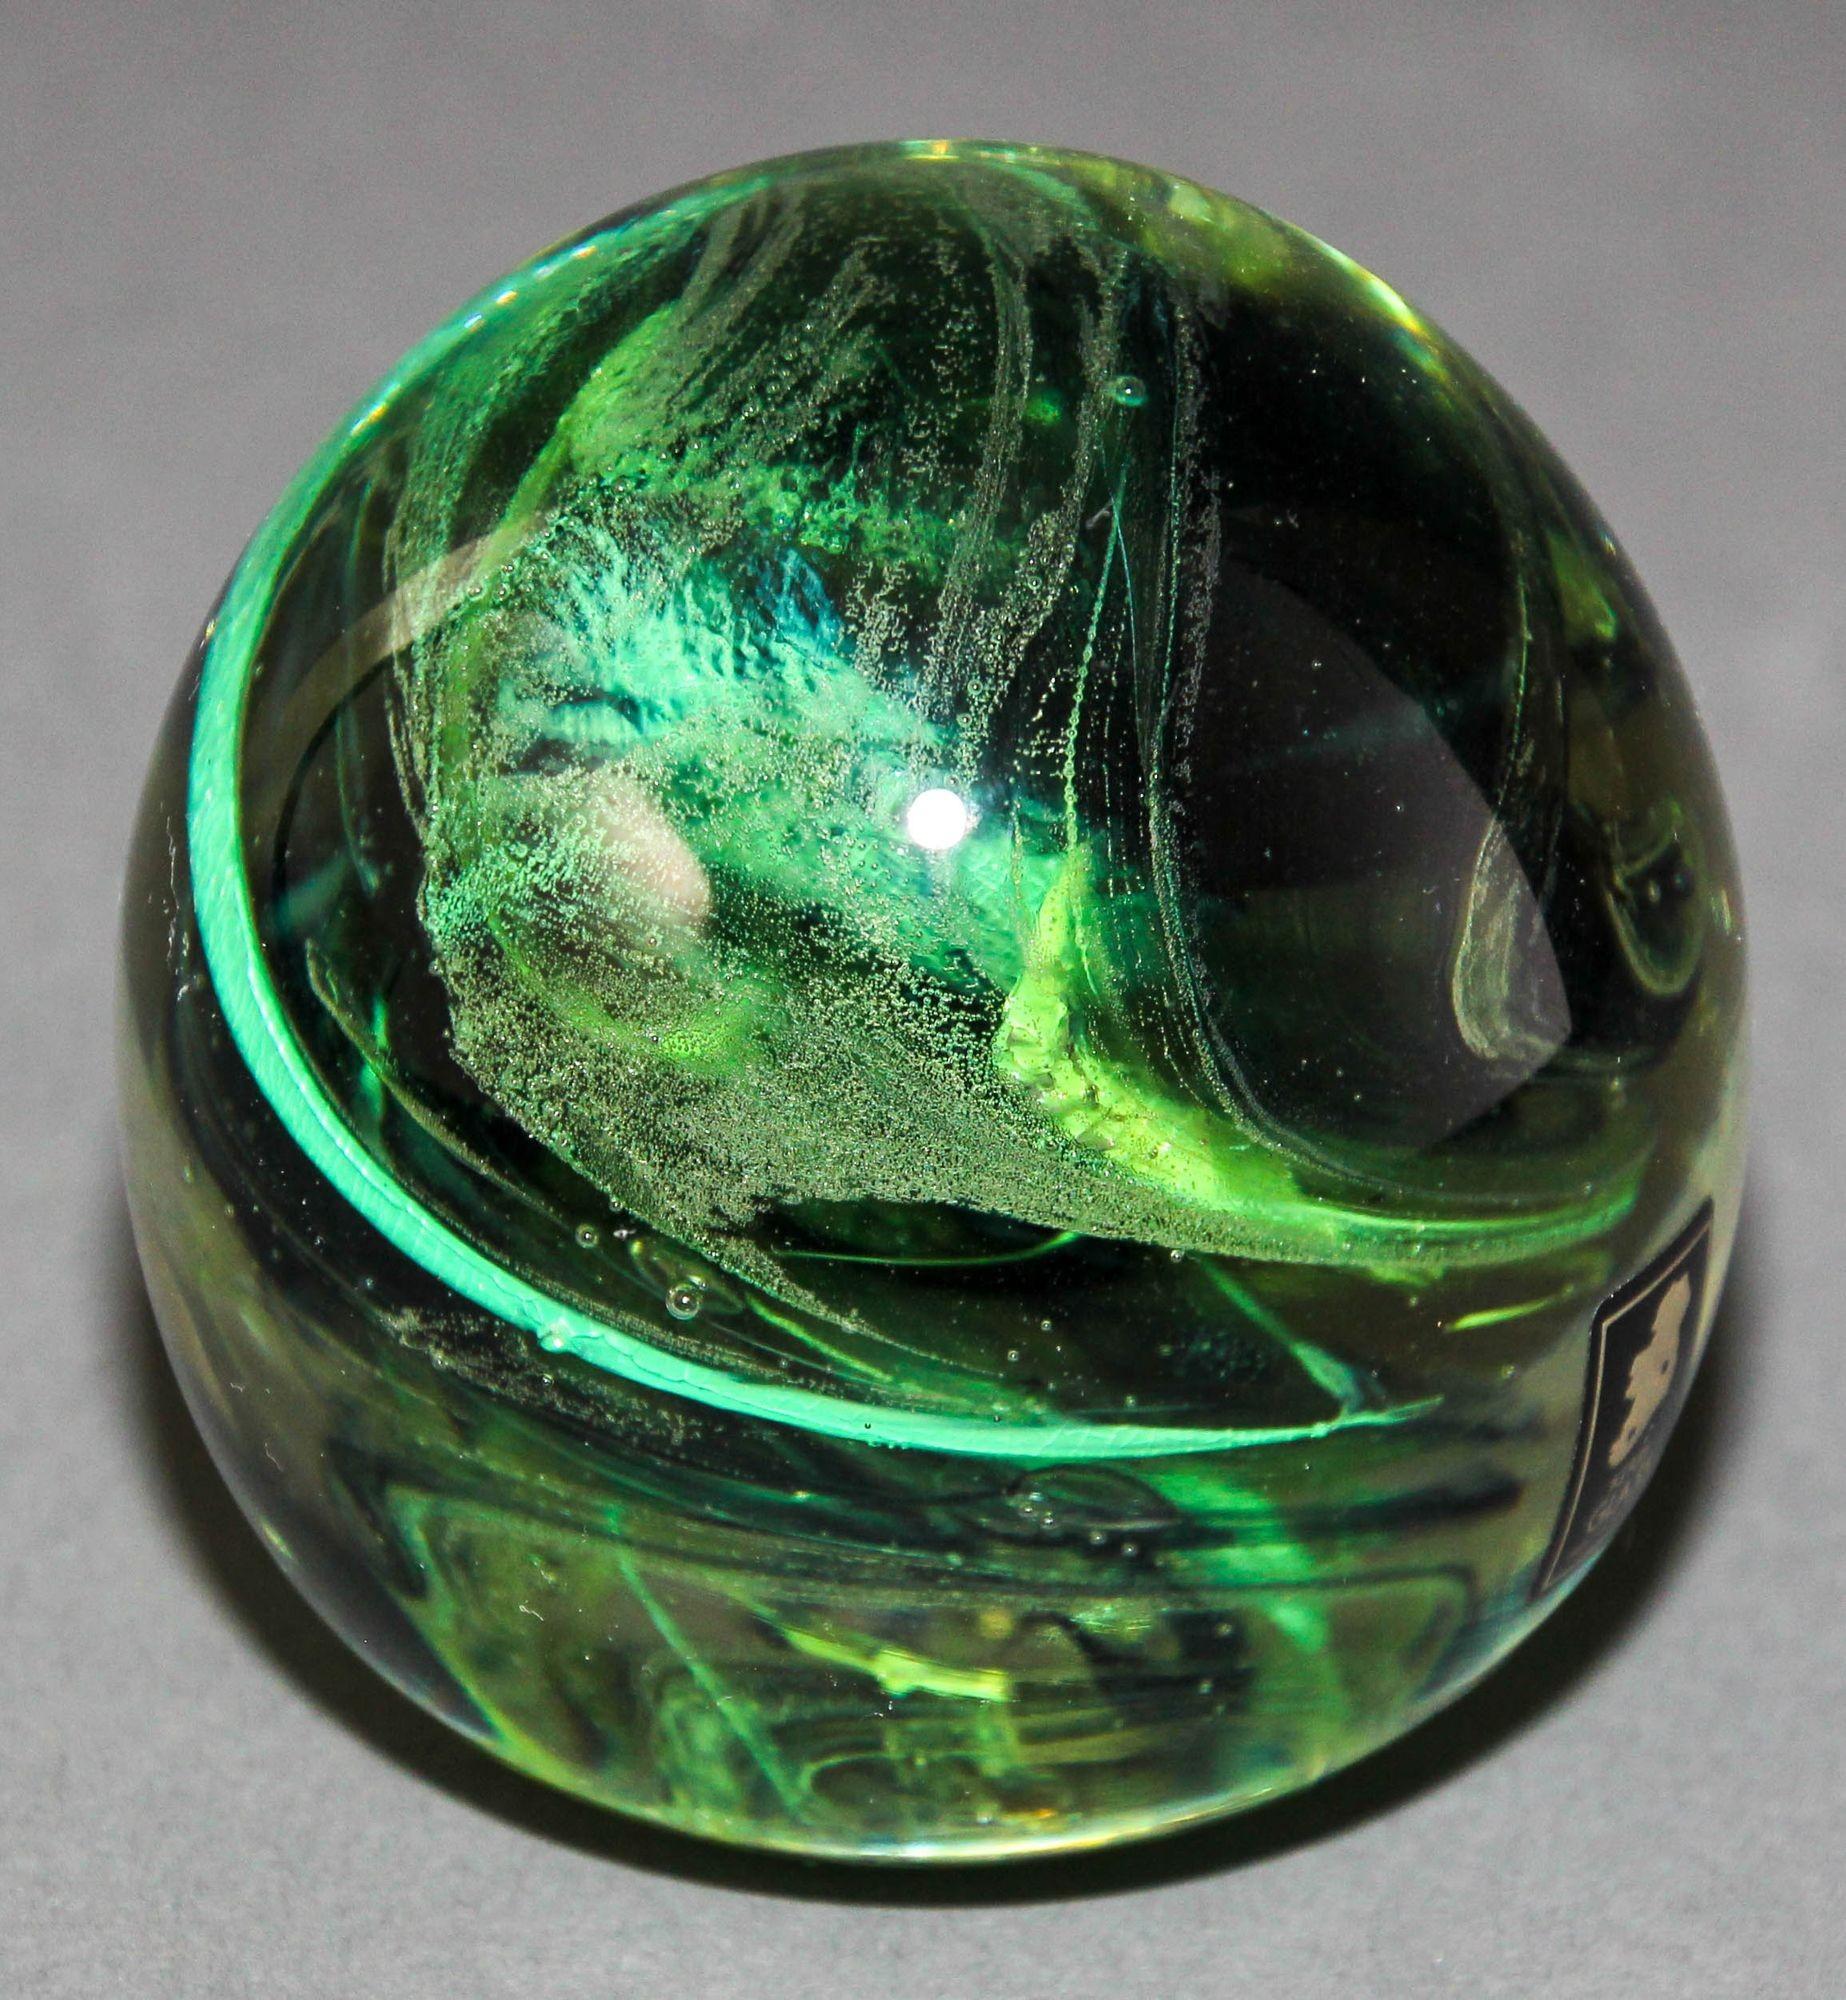 KERRY Irish Art Glass Paperweight Hand Blown in a Jade to Emerald Green 1980s For Sale 4